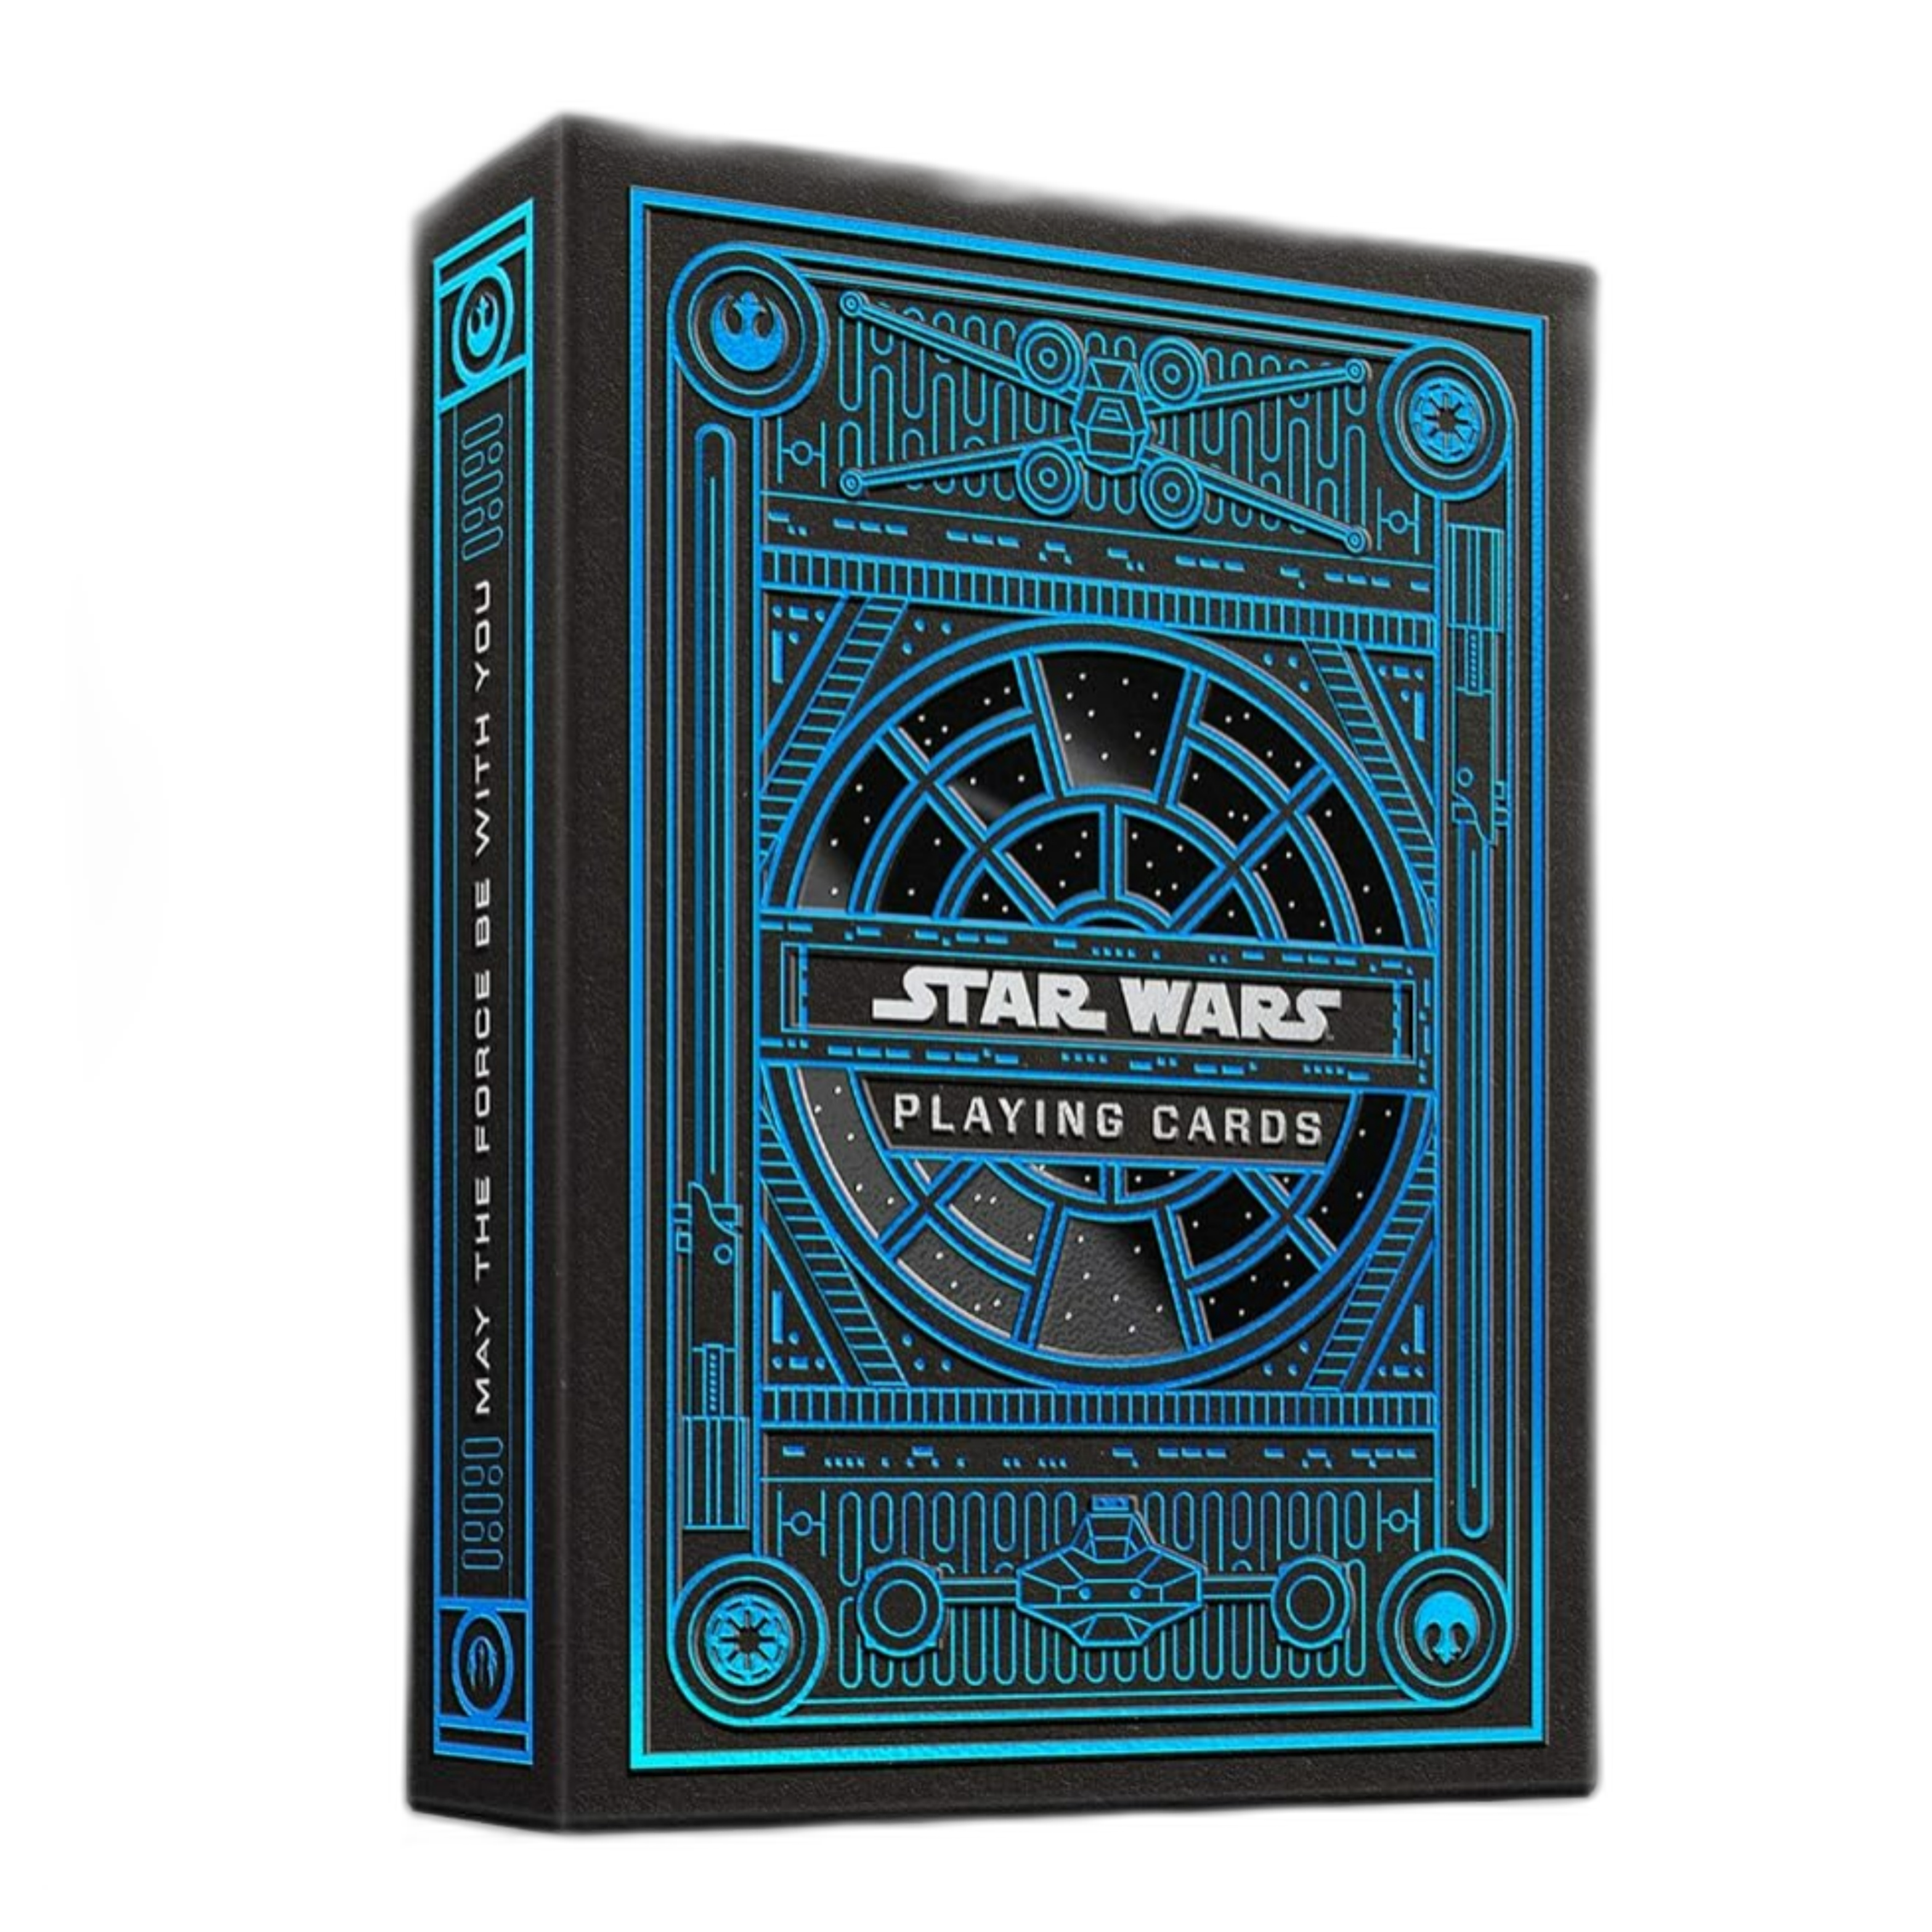 Image of theory11 Star Wars themed playing cards, in the light side color blue. 